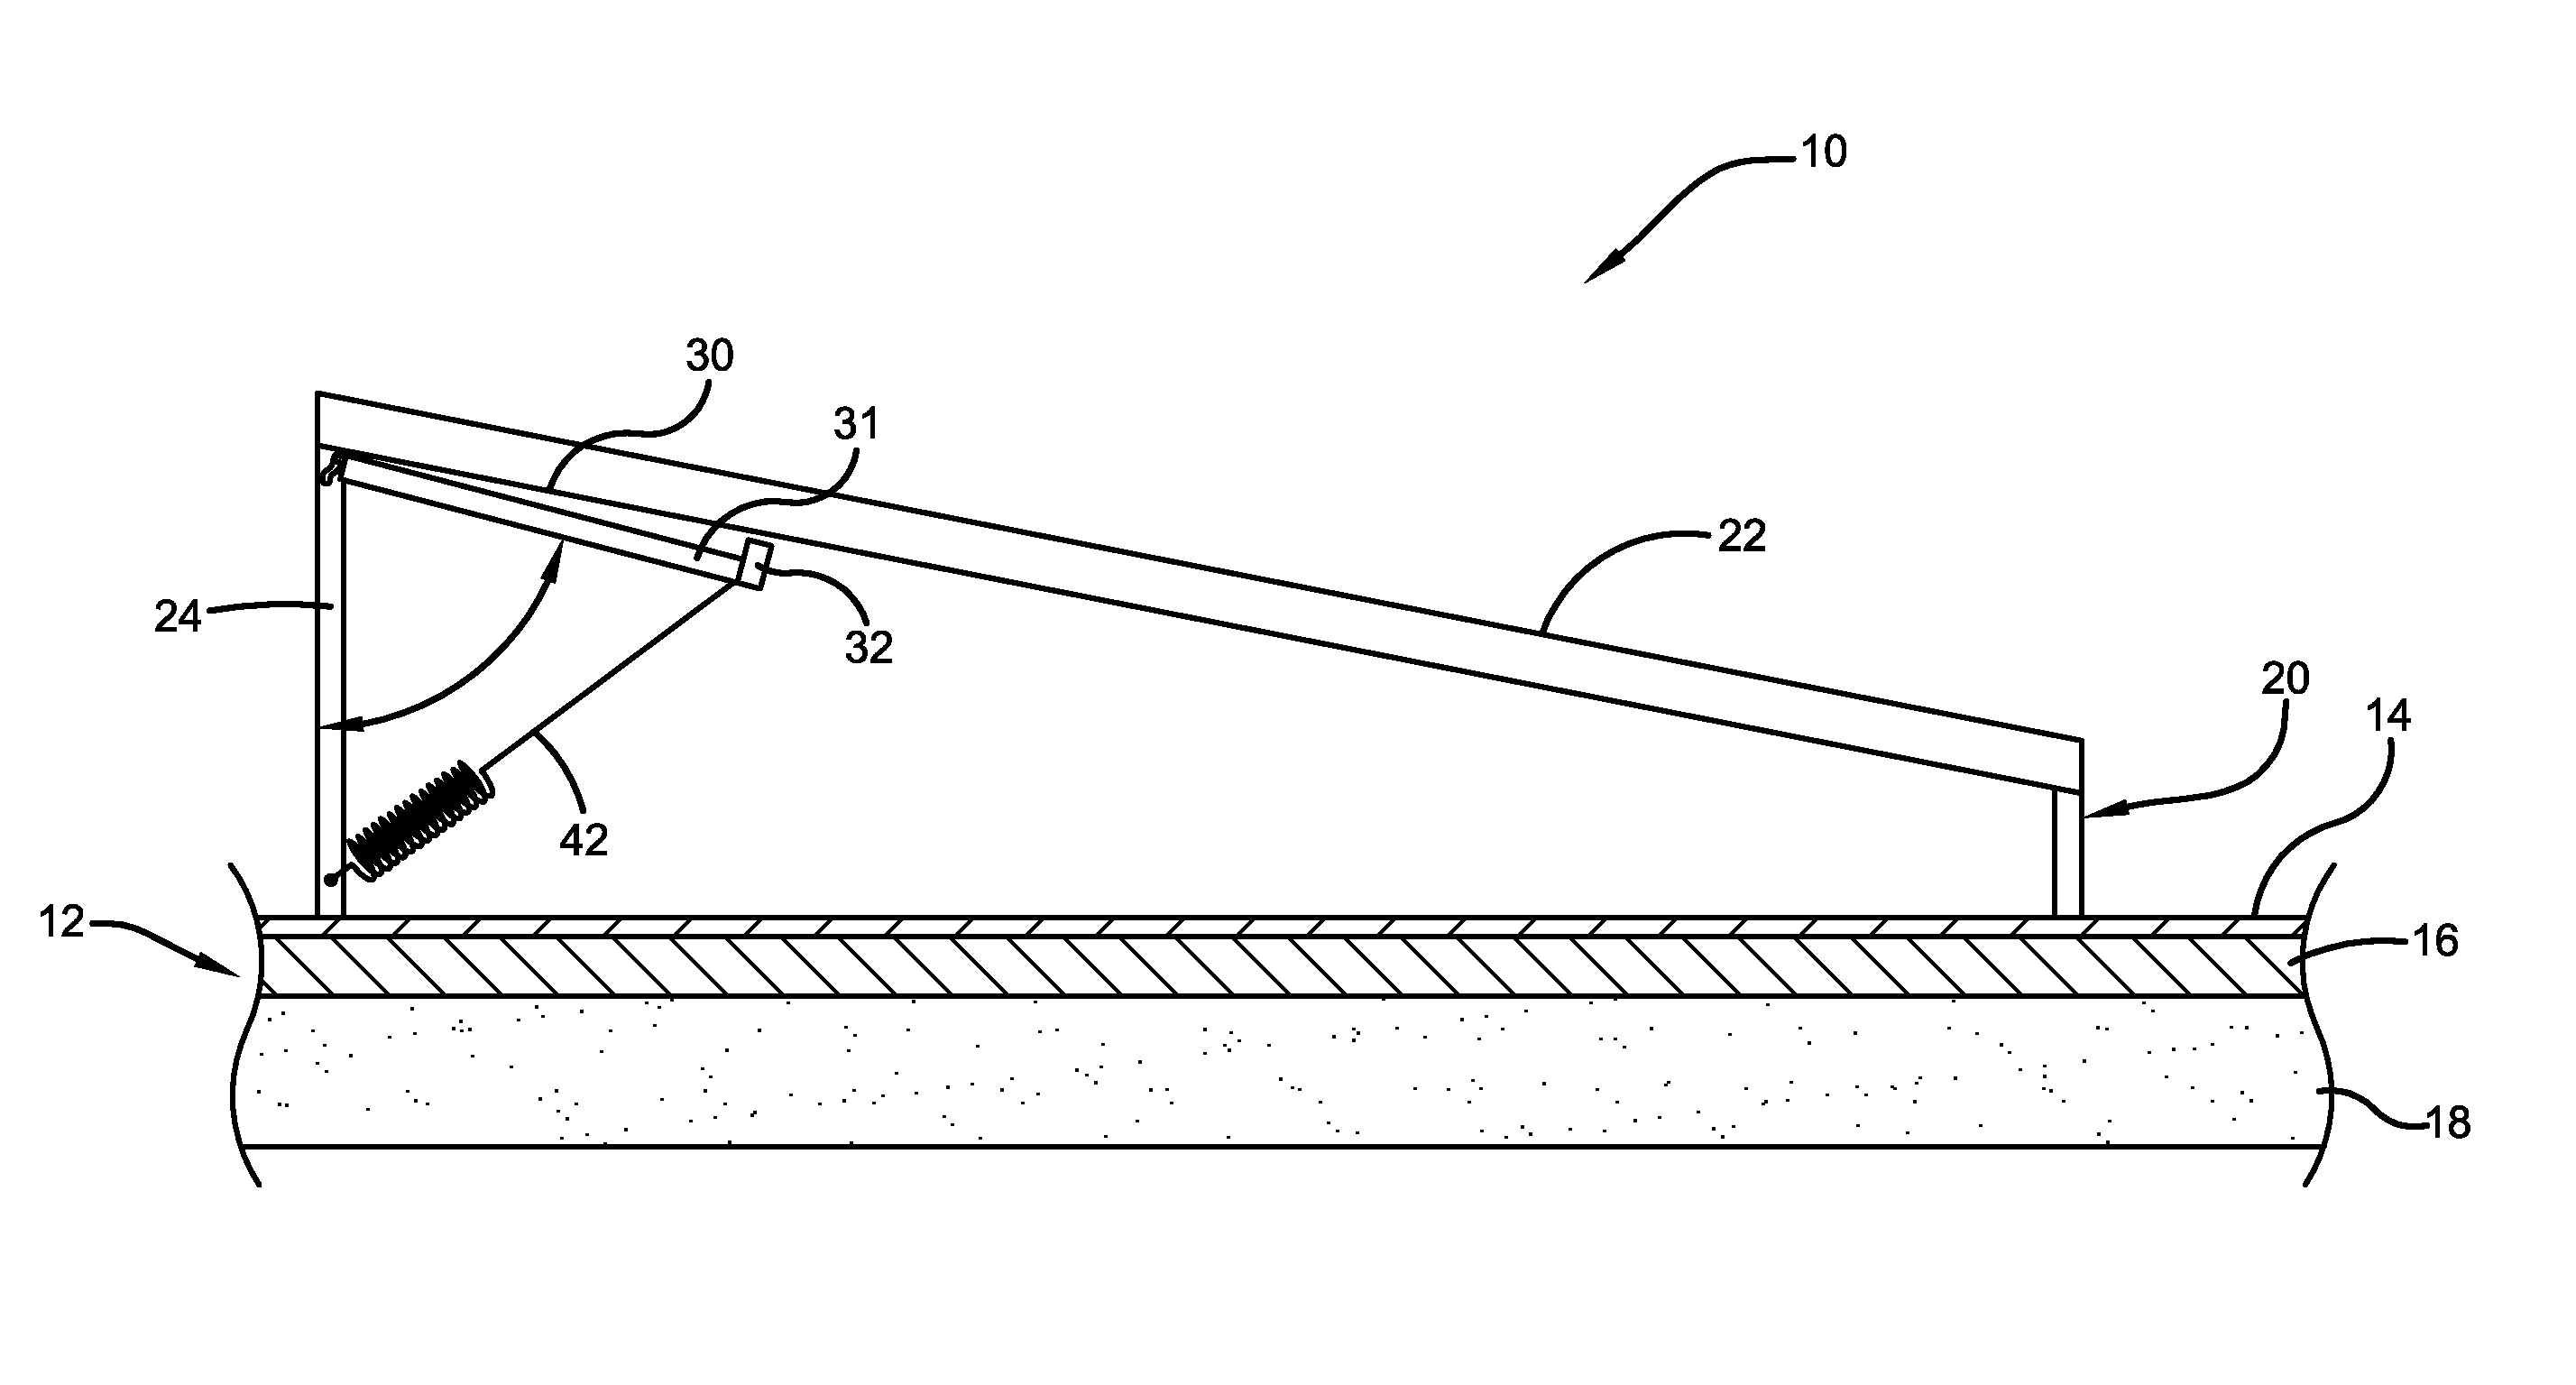 Solar panel assembly with movable barriers